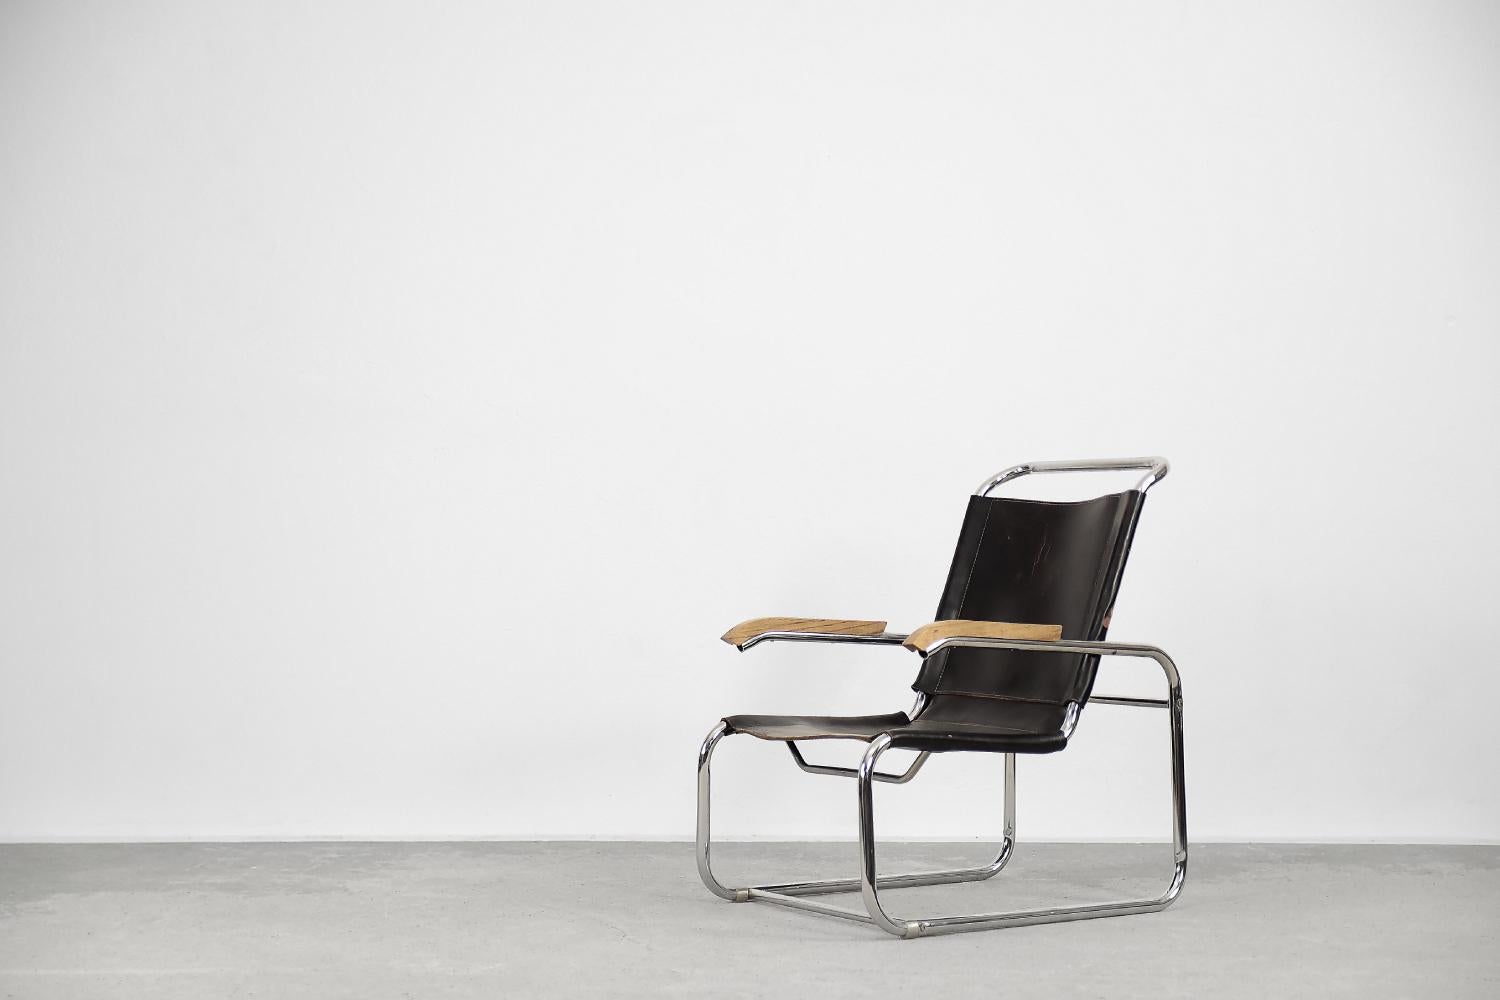 This design icon from 1928, the B35 armchair, was designed by Marcel Breuer in the late 1920s and made by the German Thonet factory in the early 1930s. This piece is made of tubular steel and black leather with natural patina. The materials used and